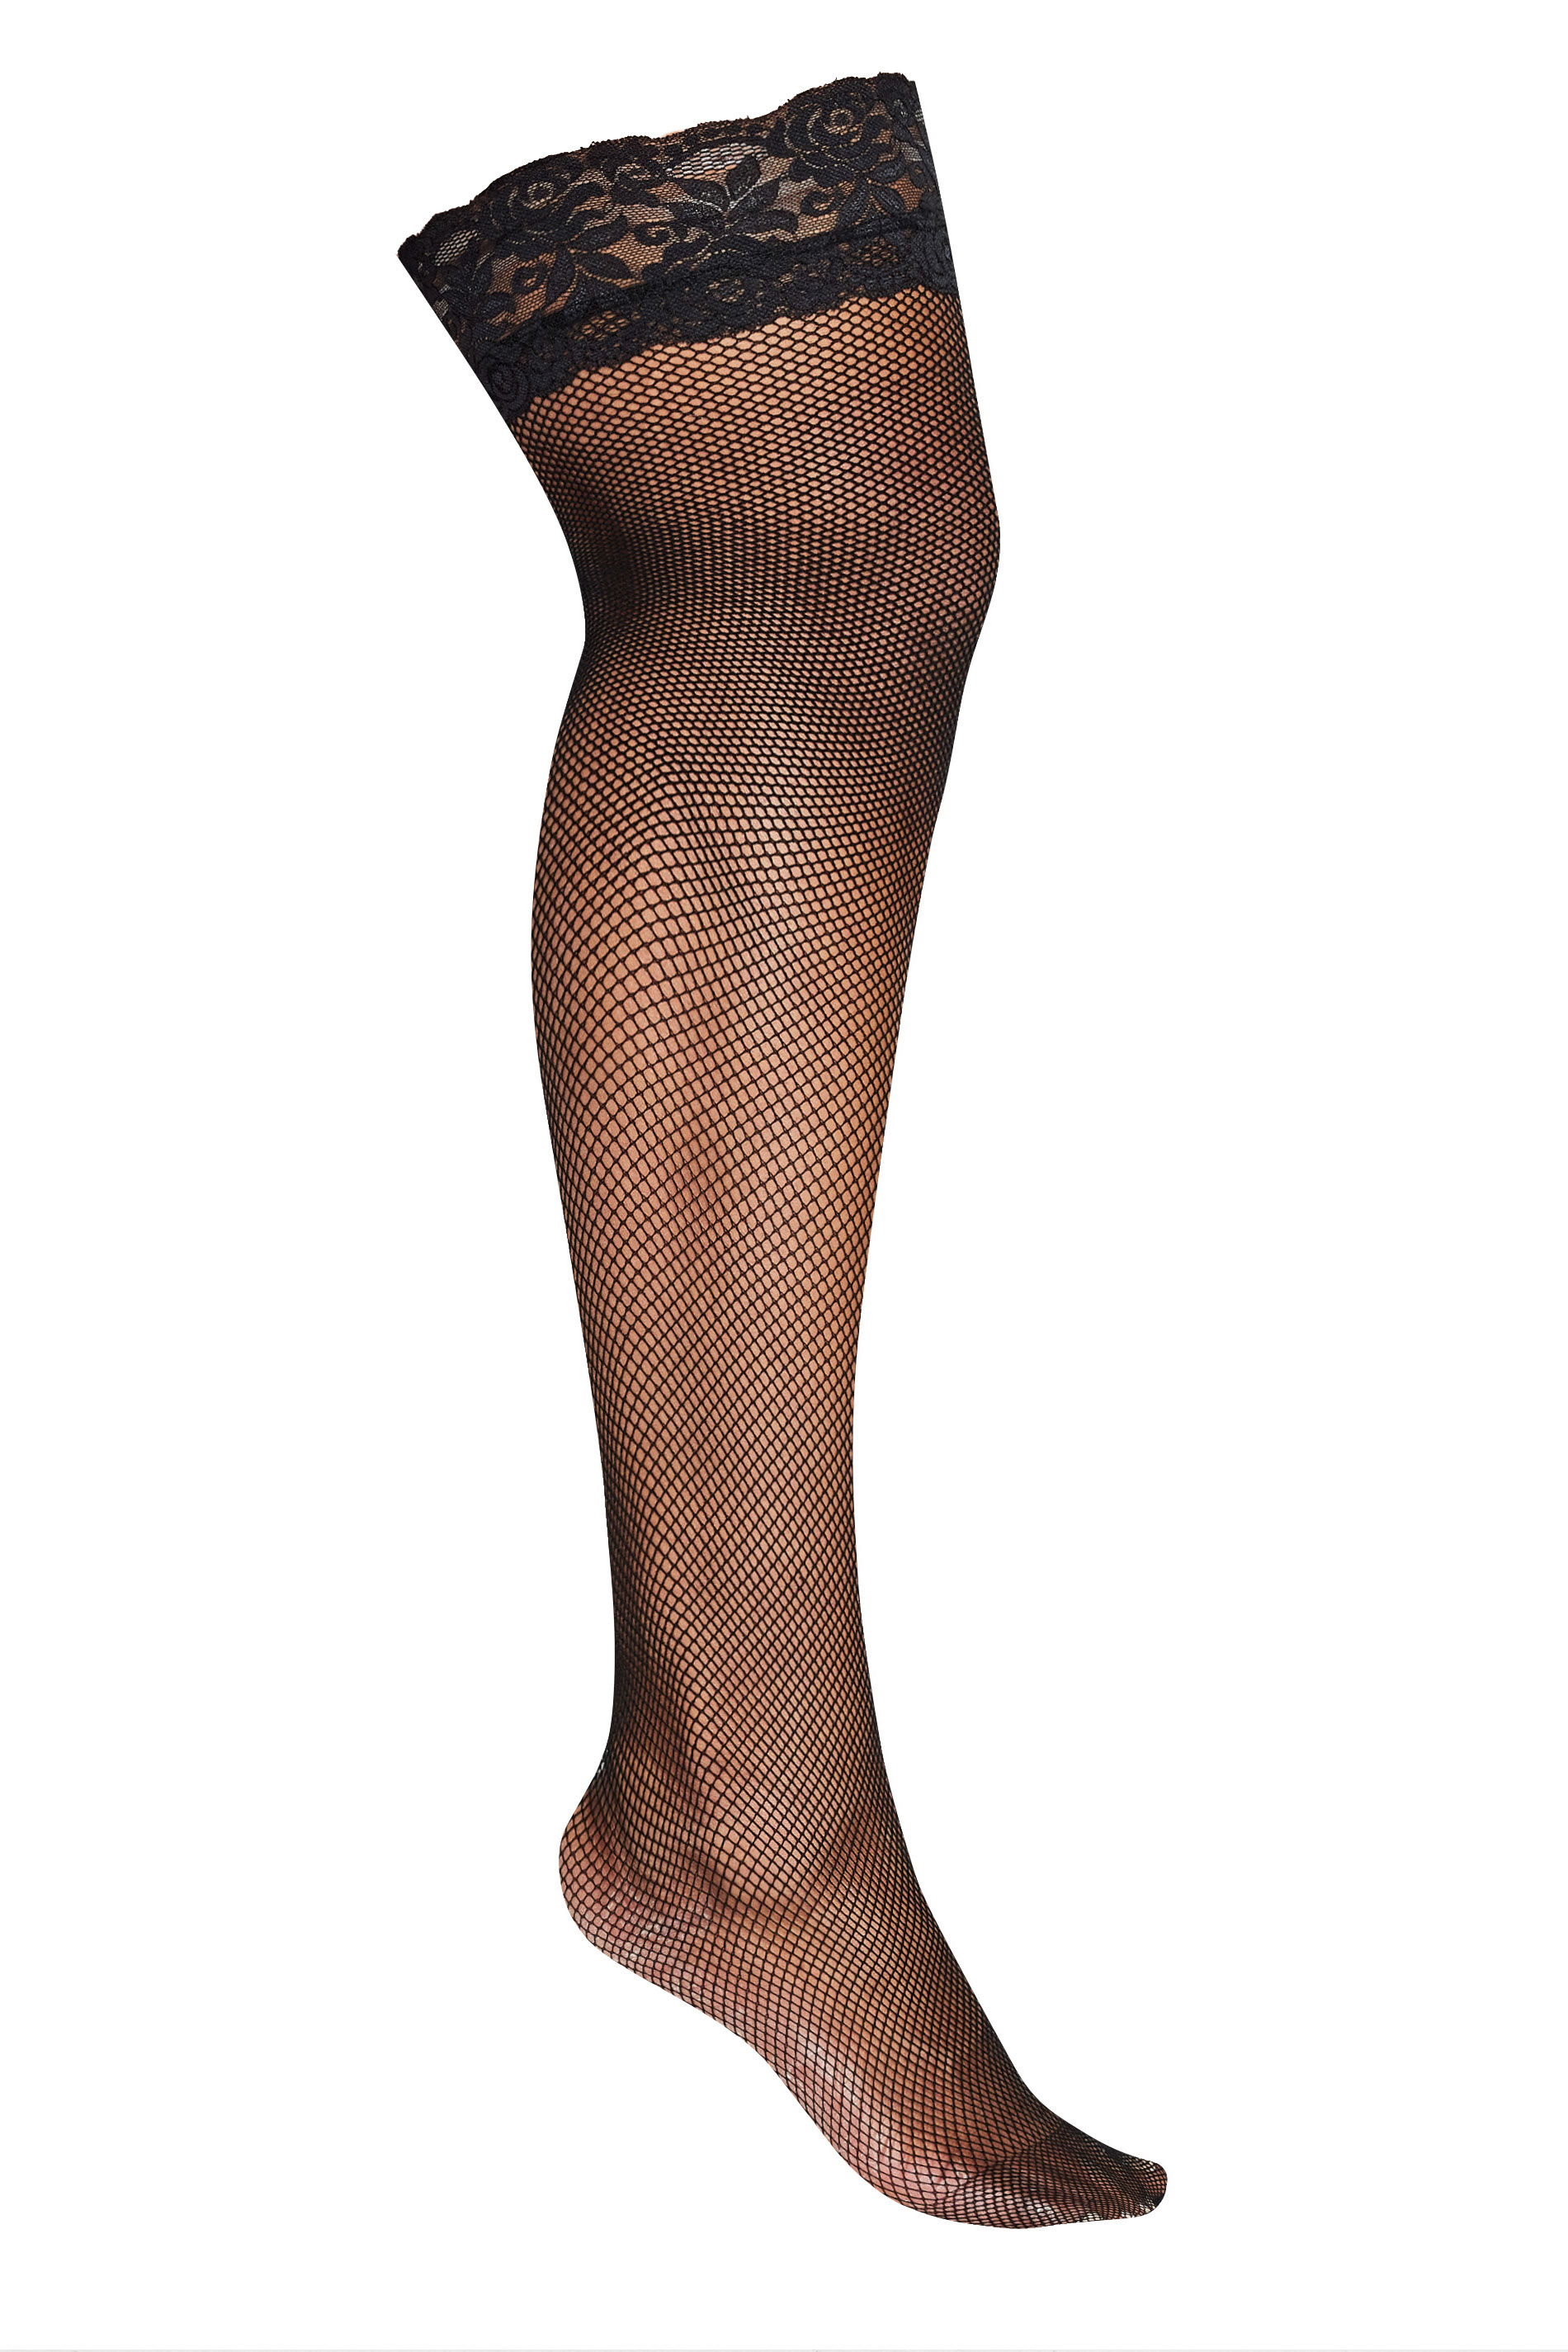 Black Fish Net Lace Top Hold Ups 3